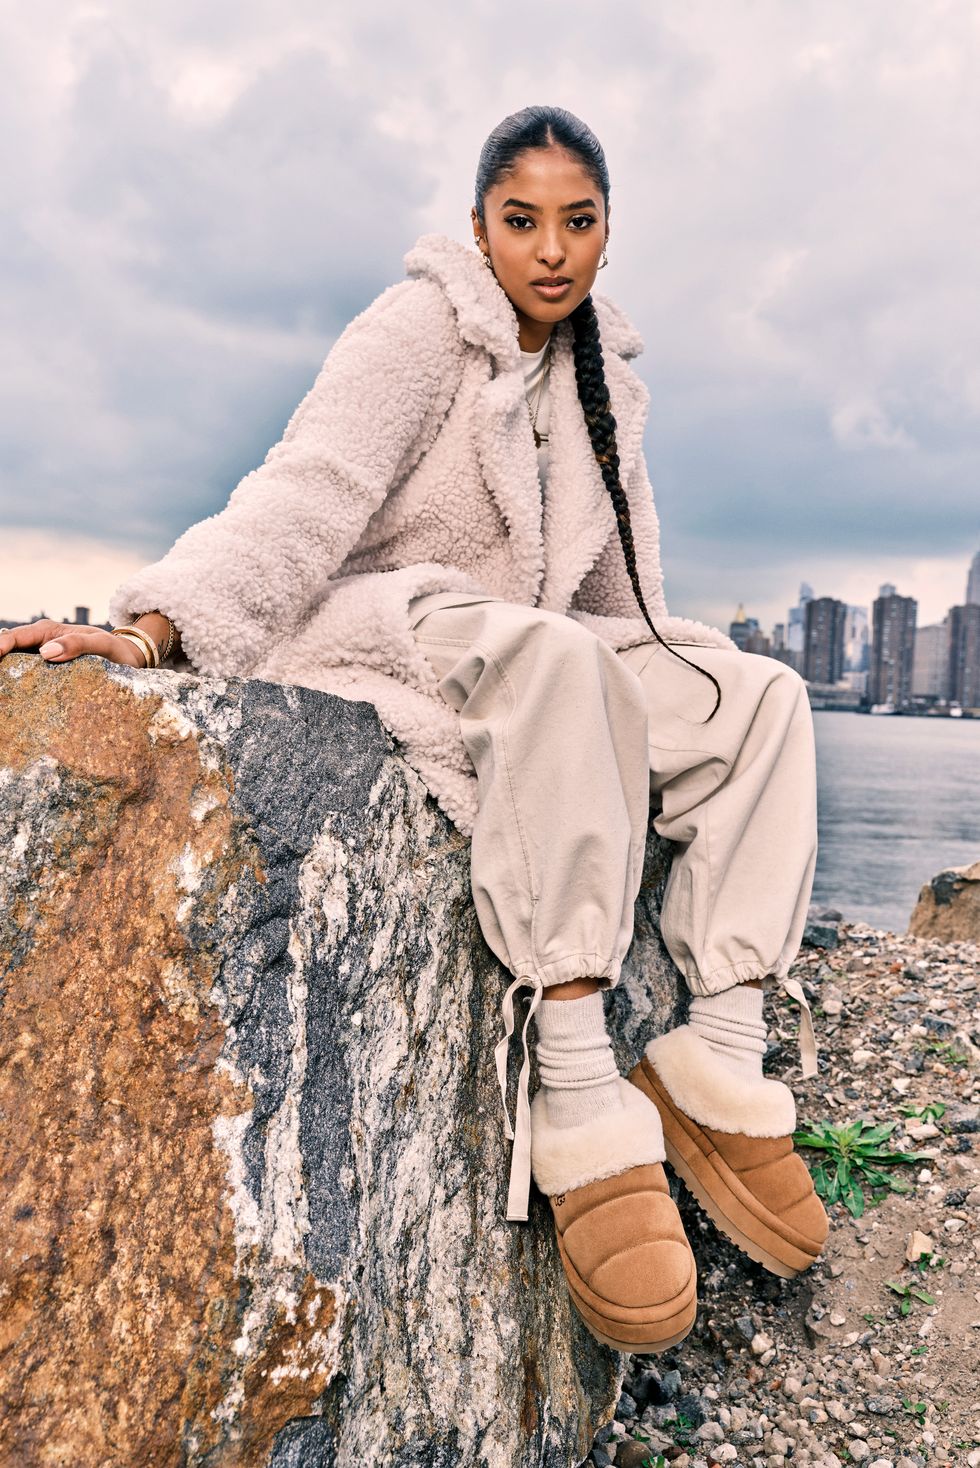 a person in a white coat sitting on a rock with a city in the background